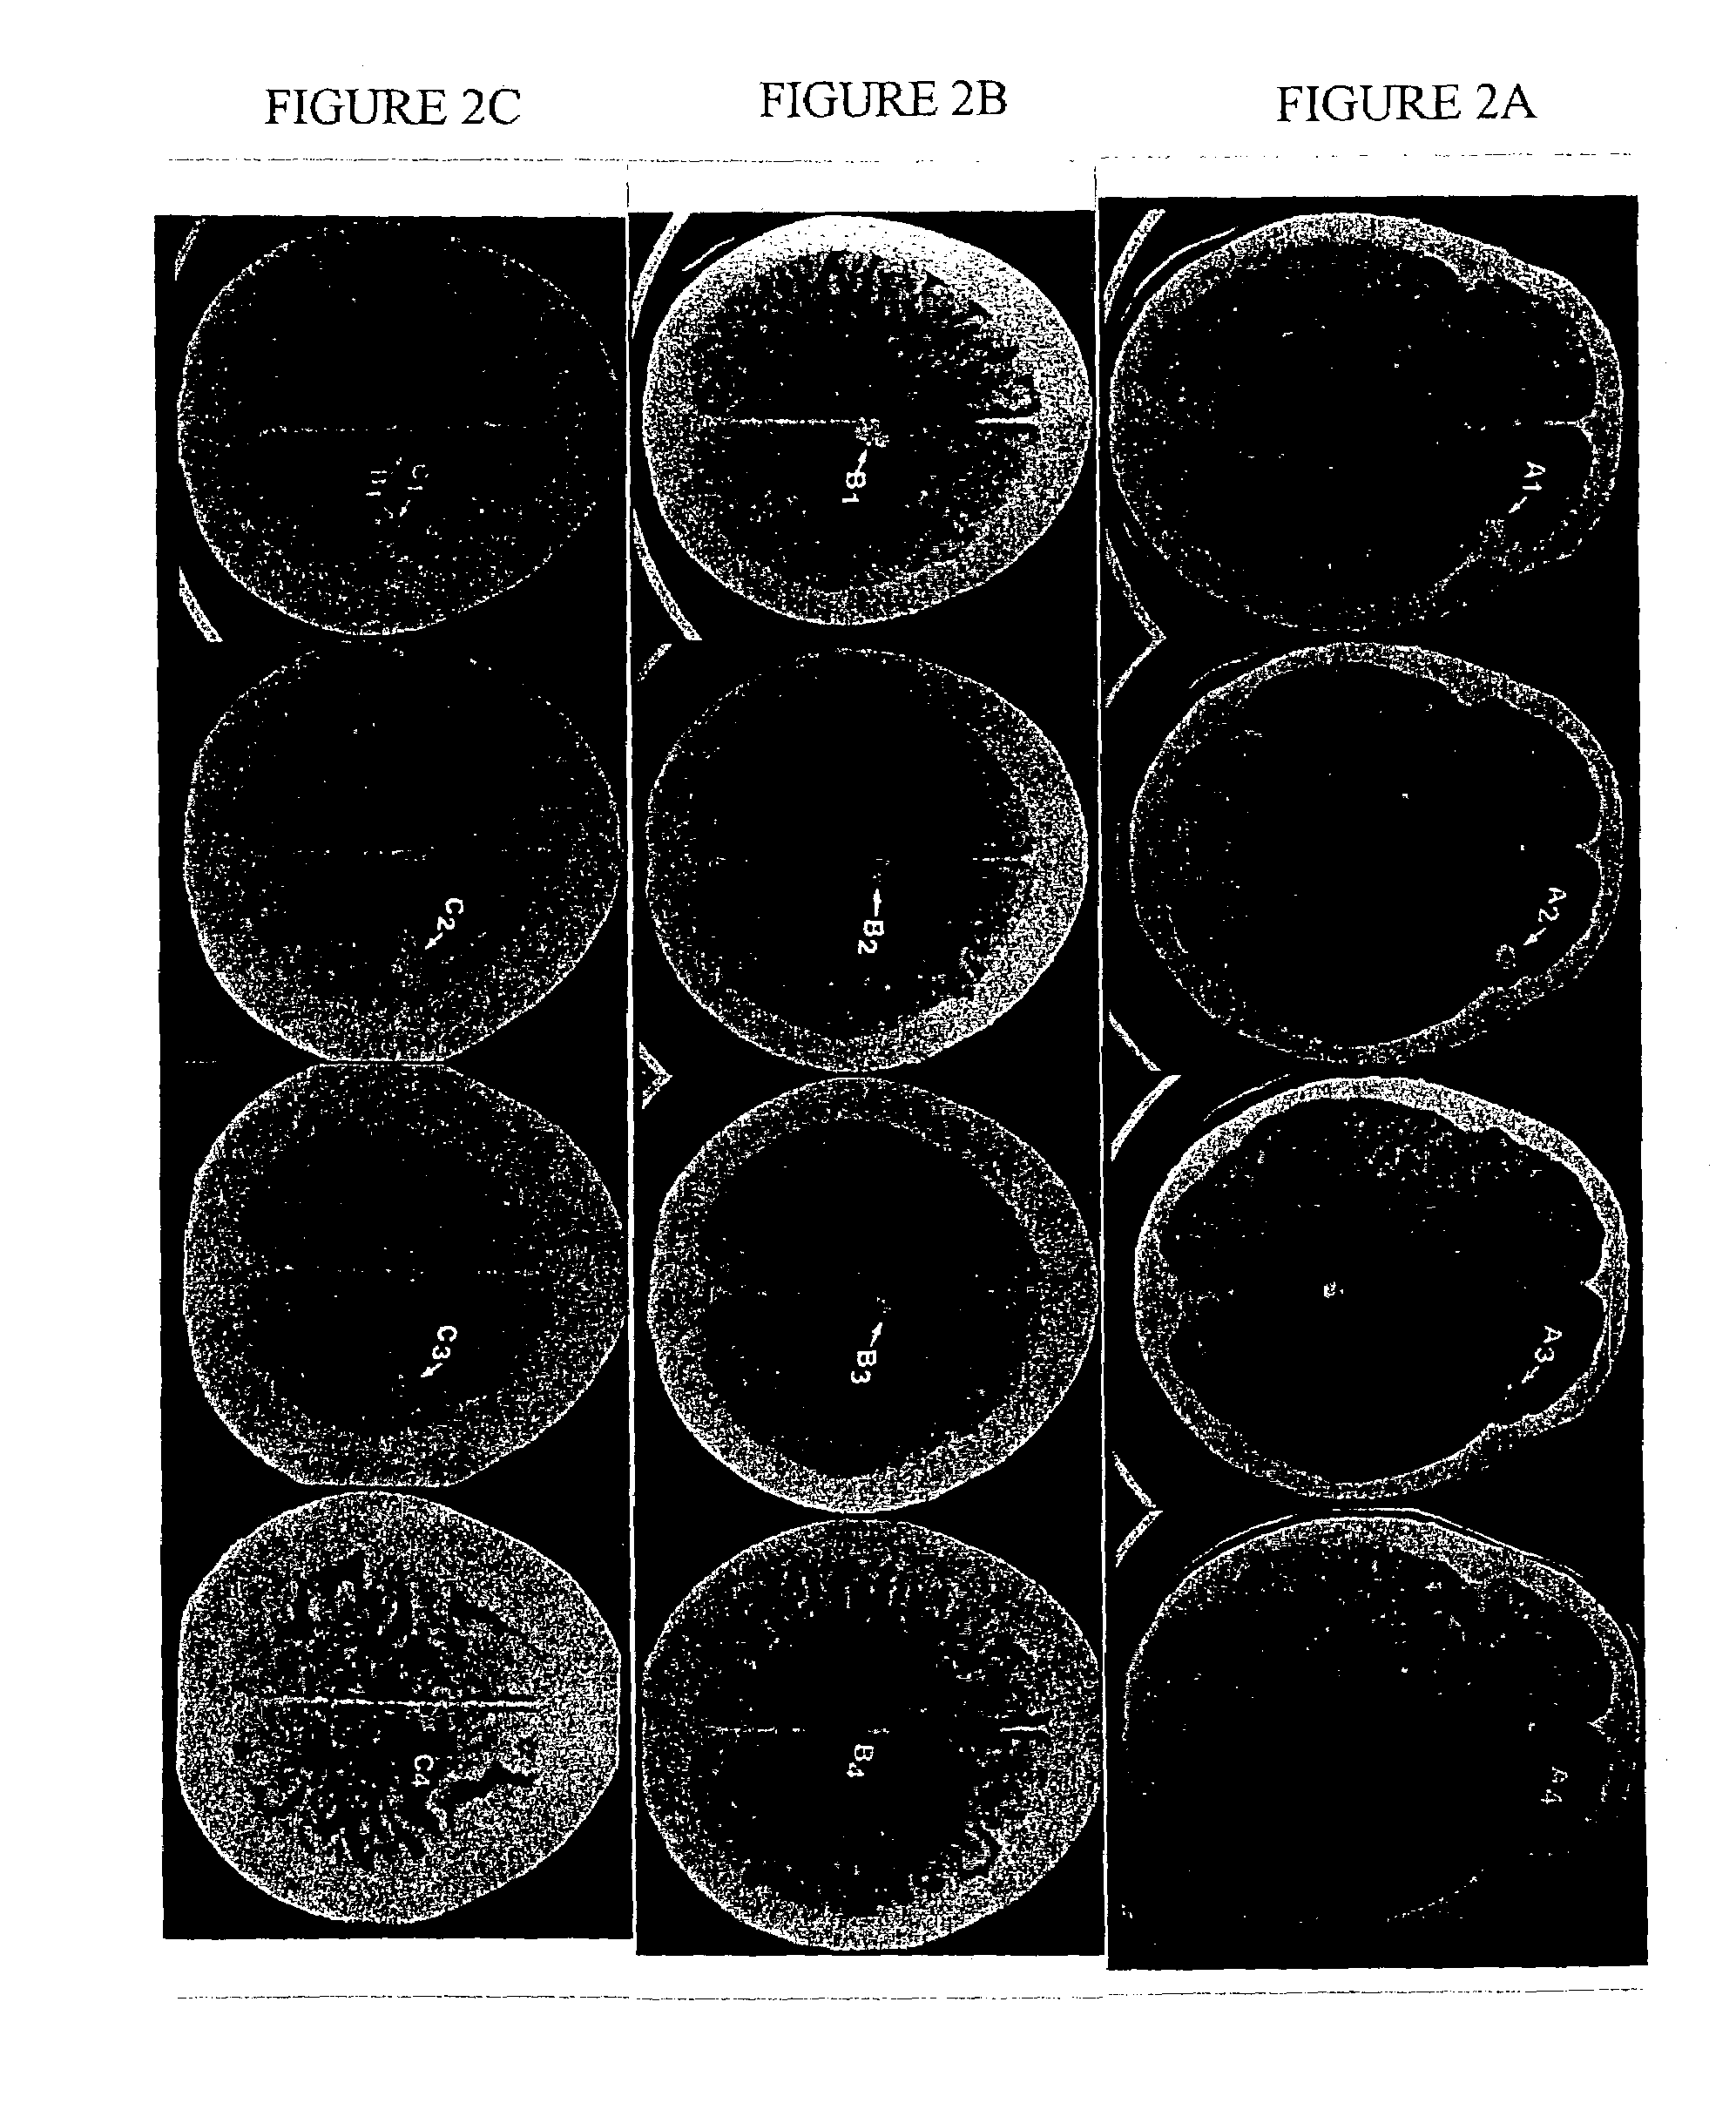 Method of treating malignancies and viral infections and improving immune function with a dietary supplement